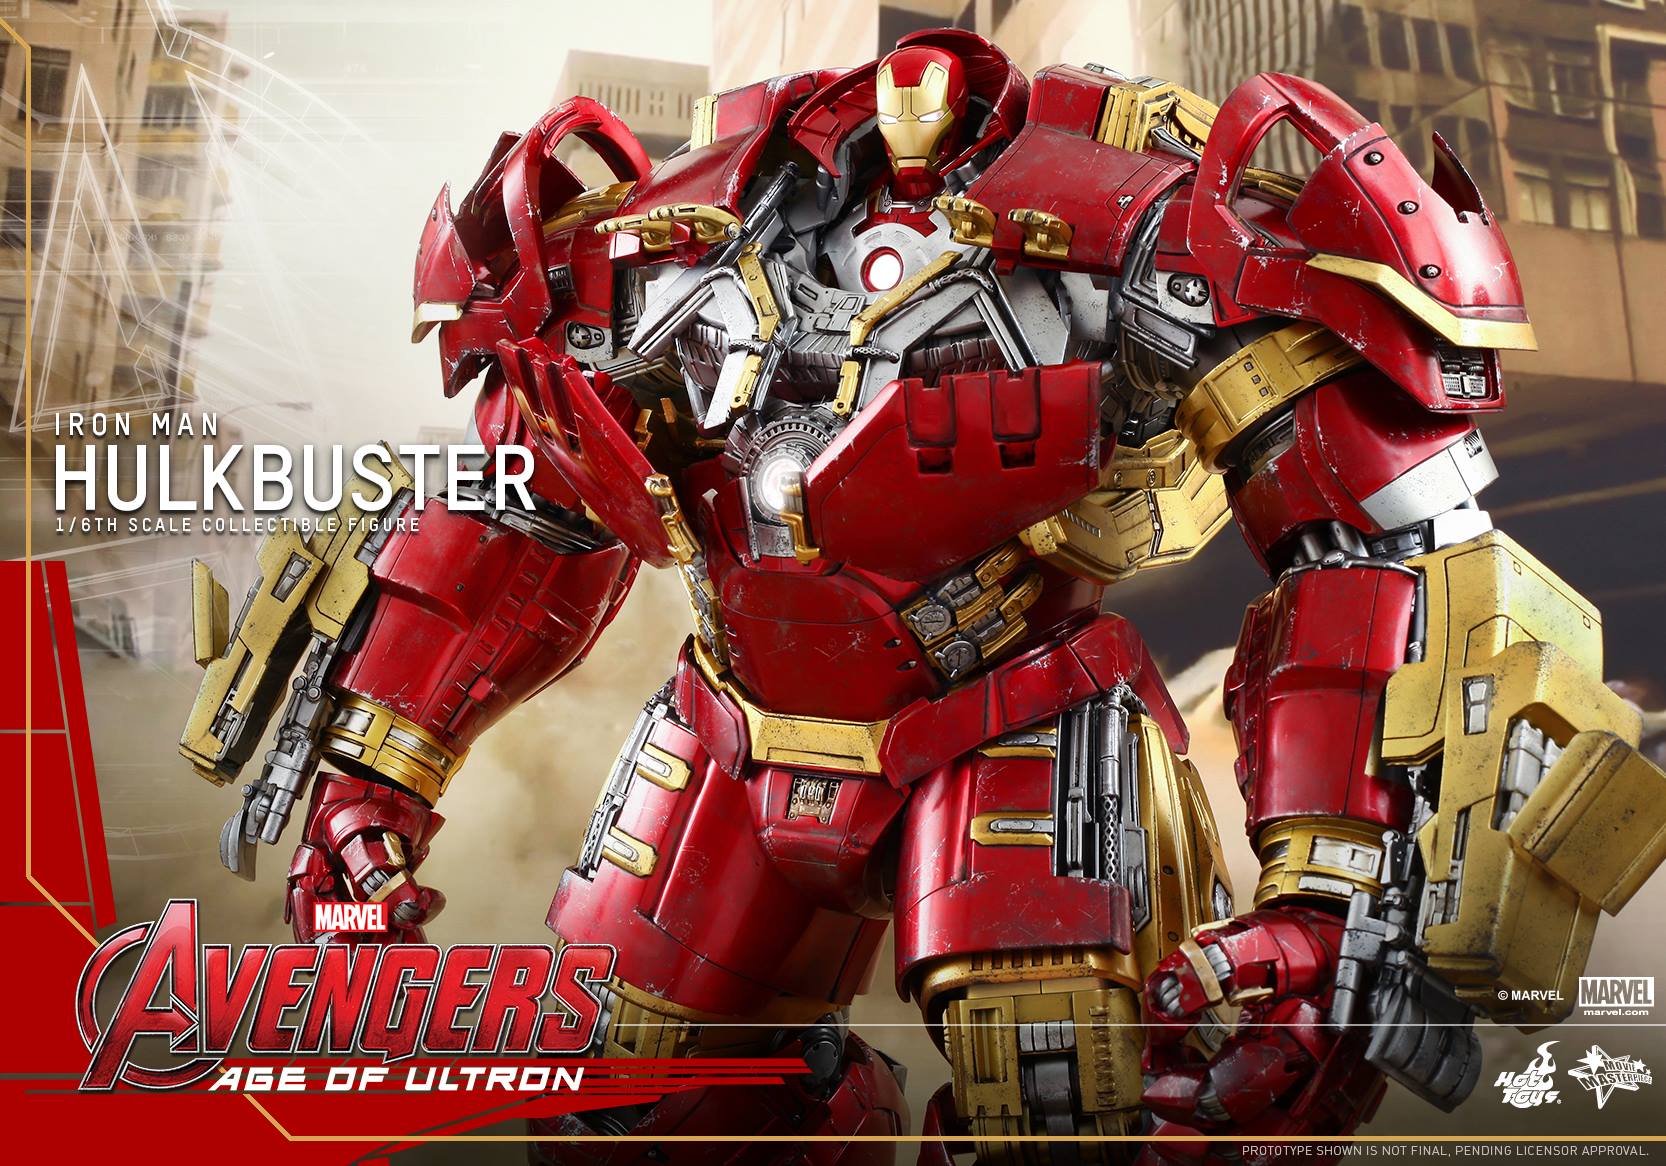 Inside Avengers Age Of Ultron S Hulkbuster In New Hot Toys Image